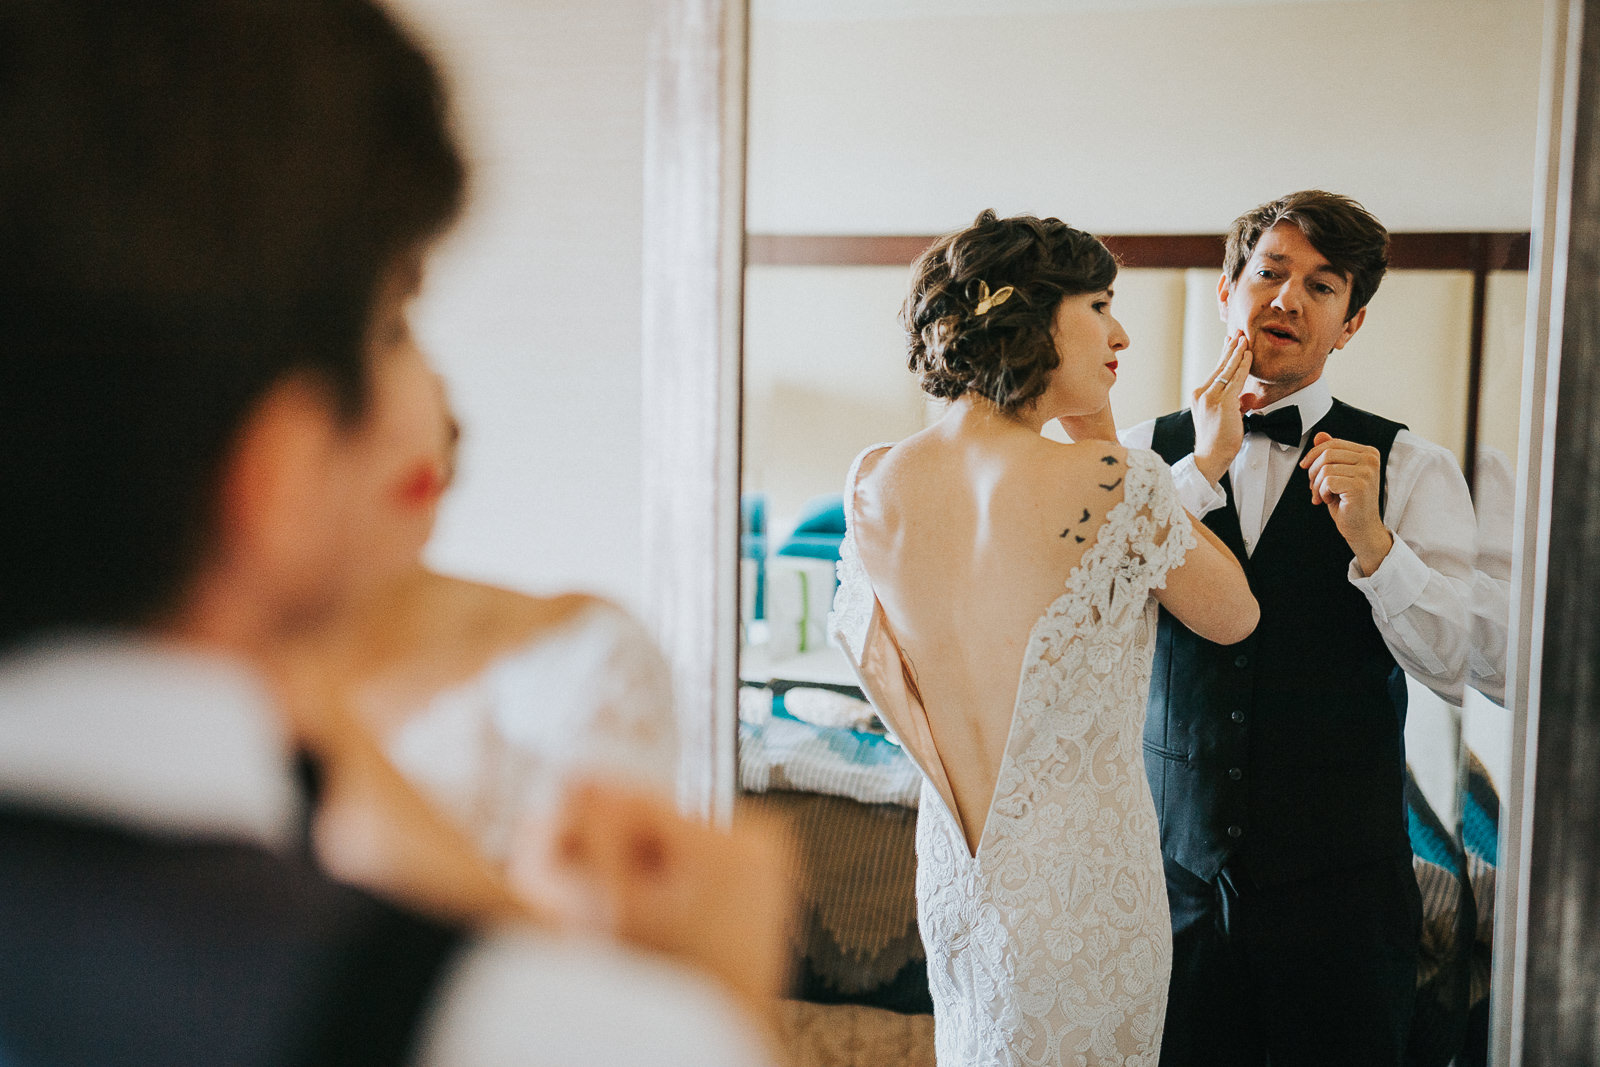 11 bride and groom getting ready for a wedding - Megan + Jon // Orpheum Wedding Photography in Madison